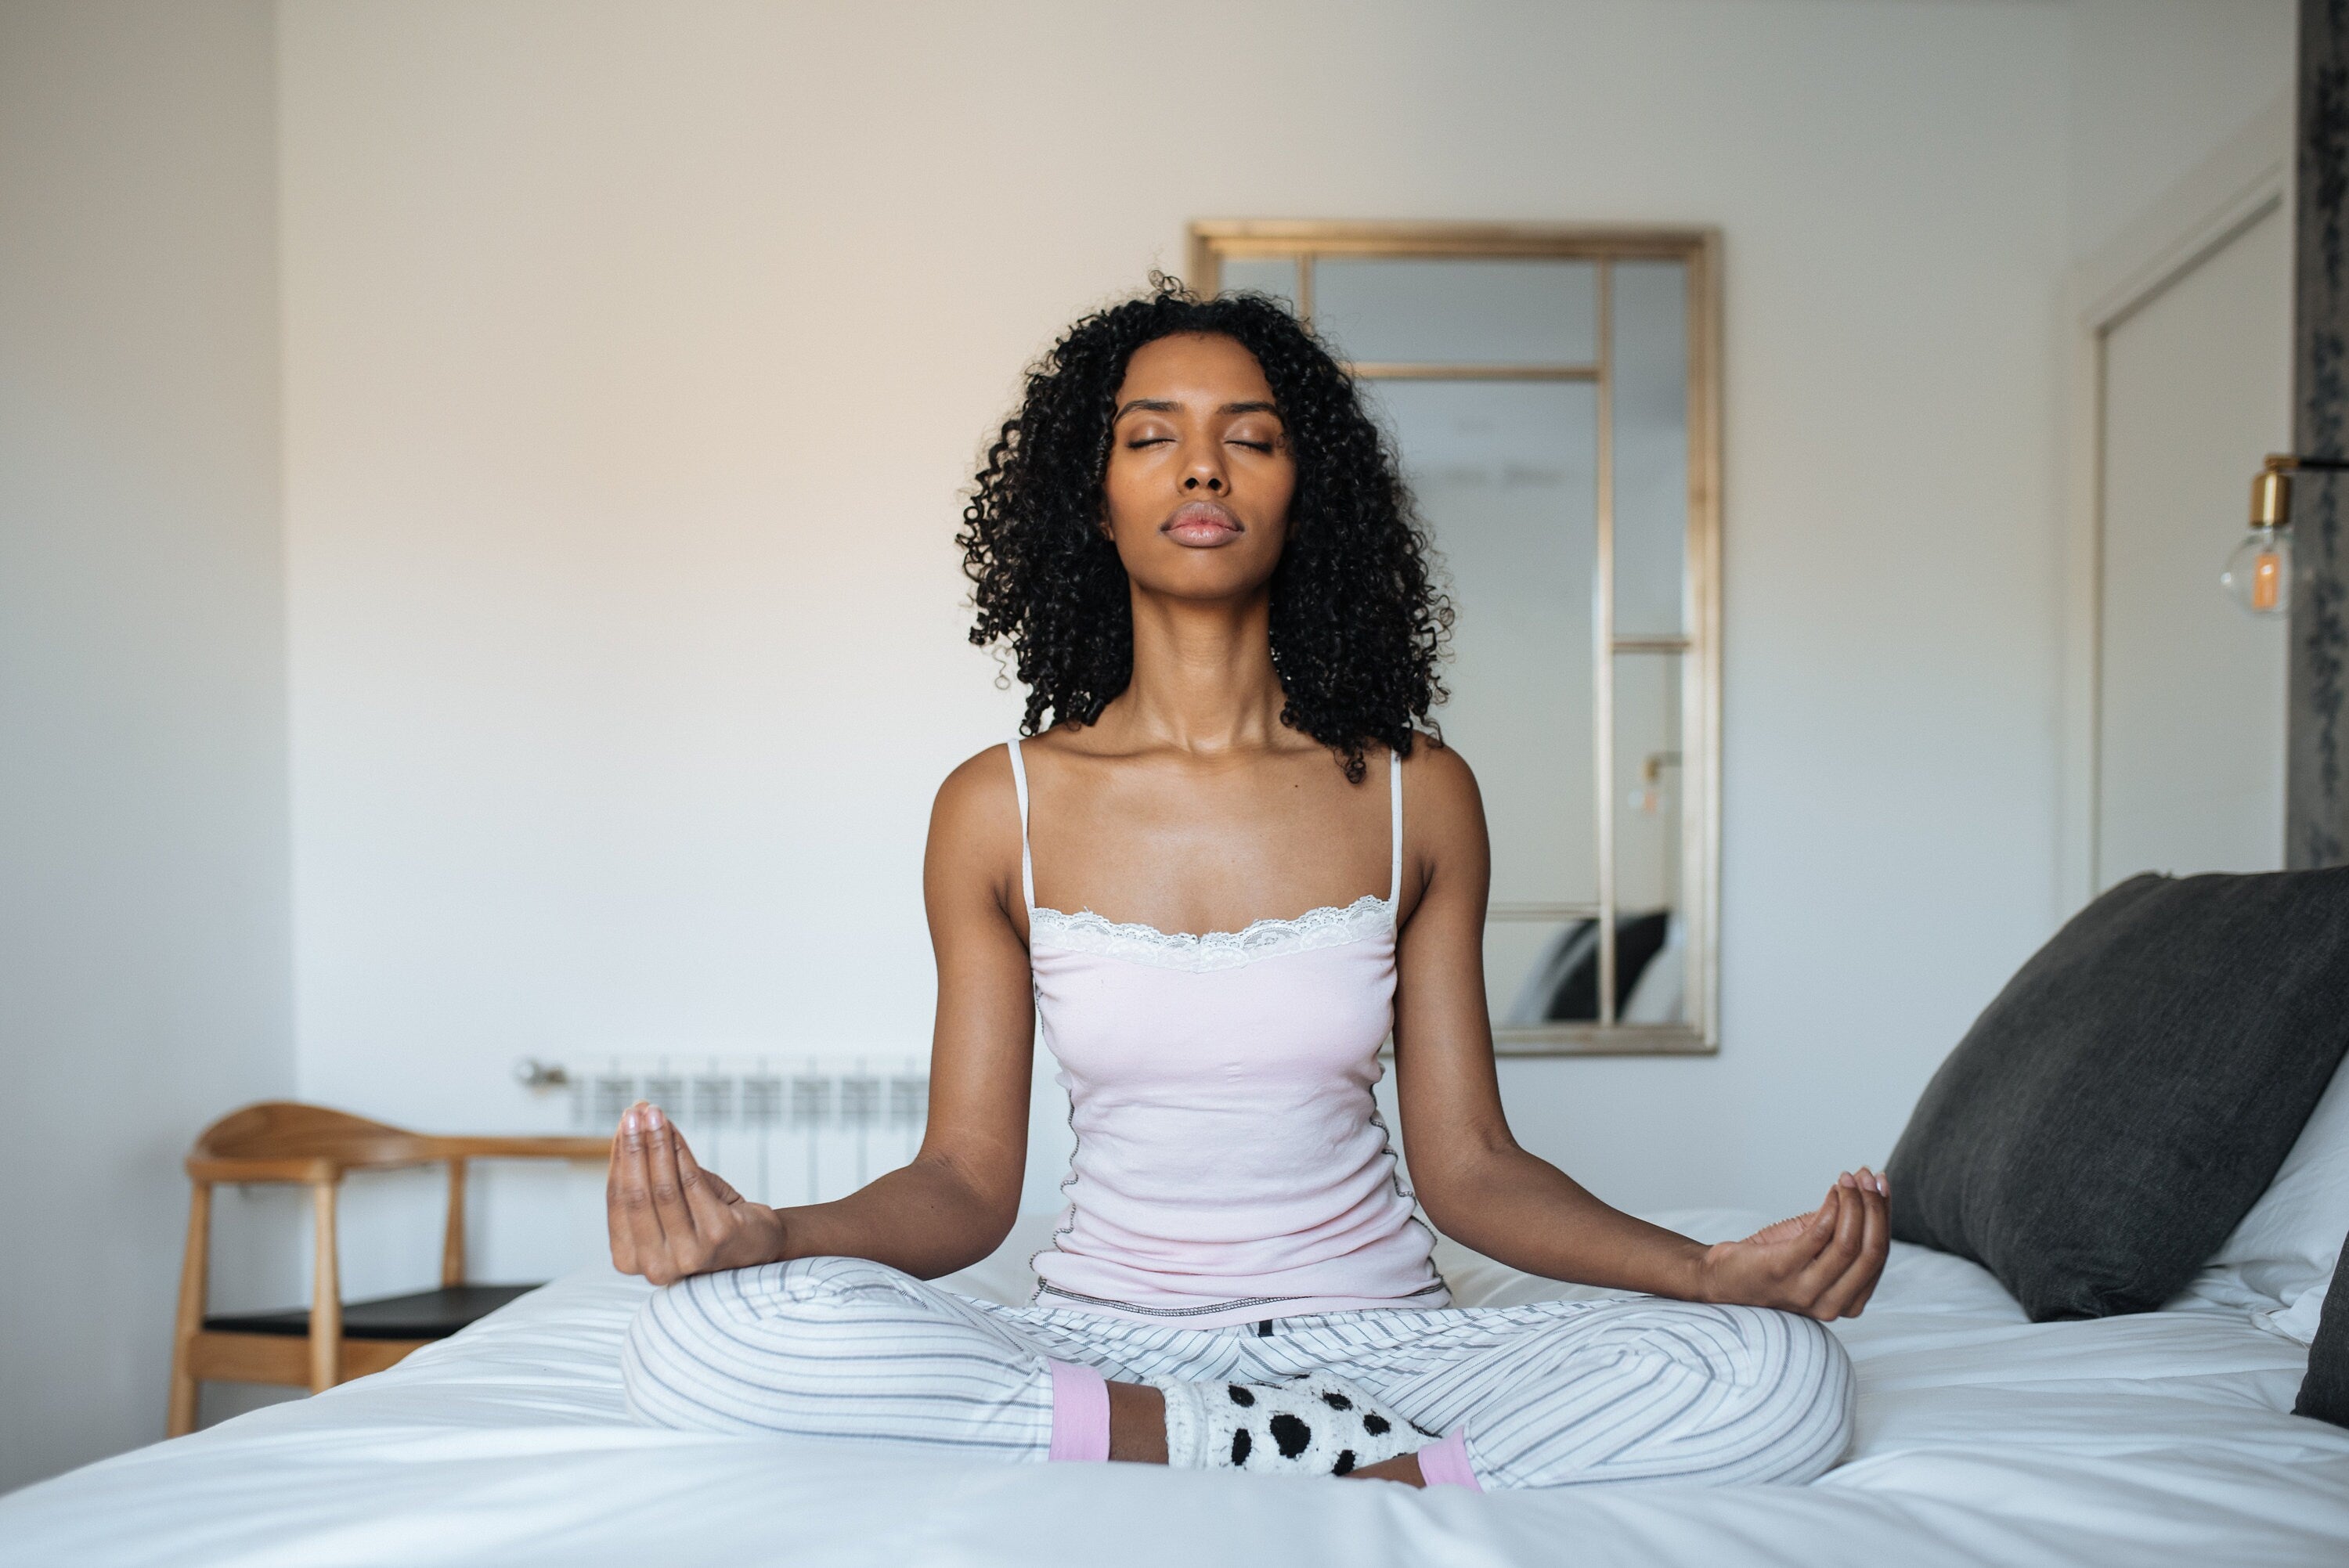 Meditation | 7 Day Sleep Course - A 7 day course by Linda Hall